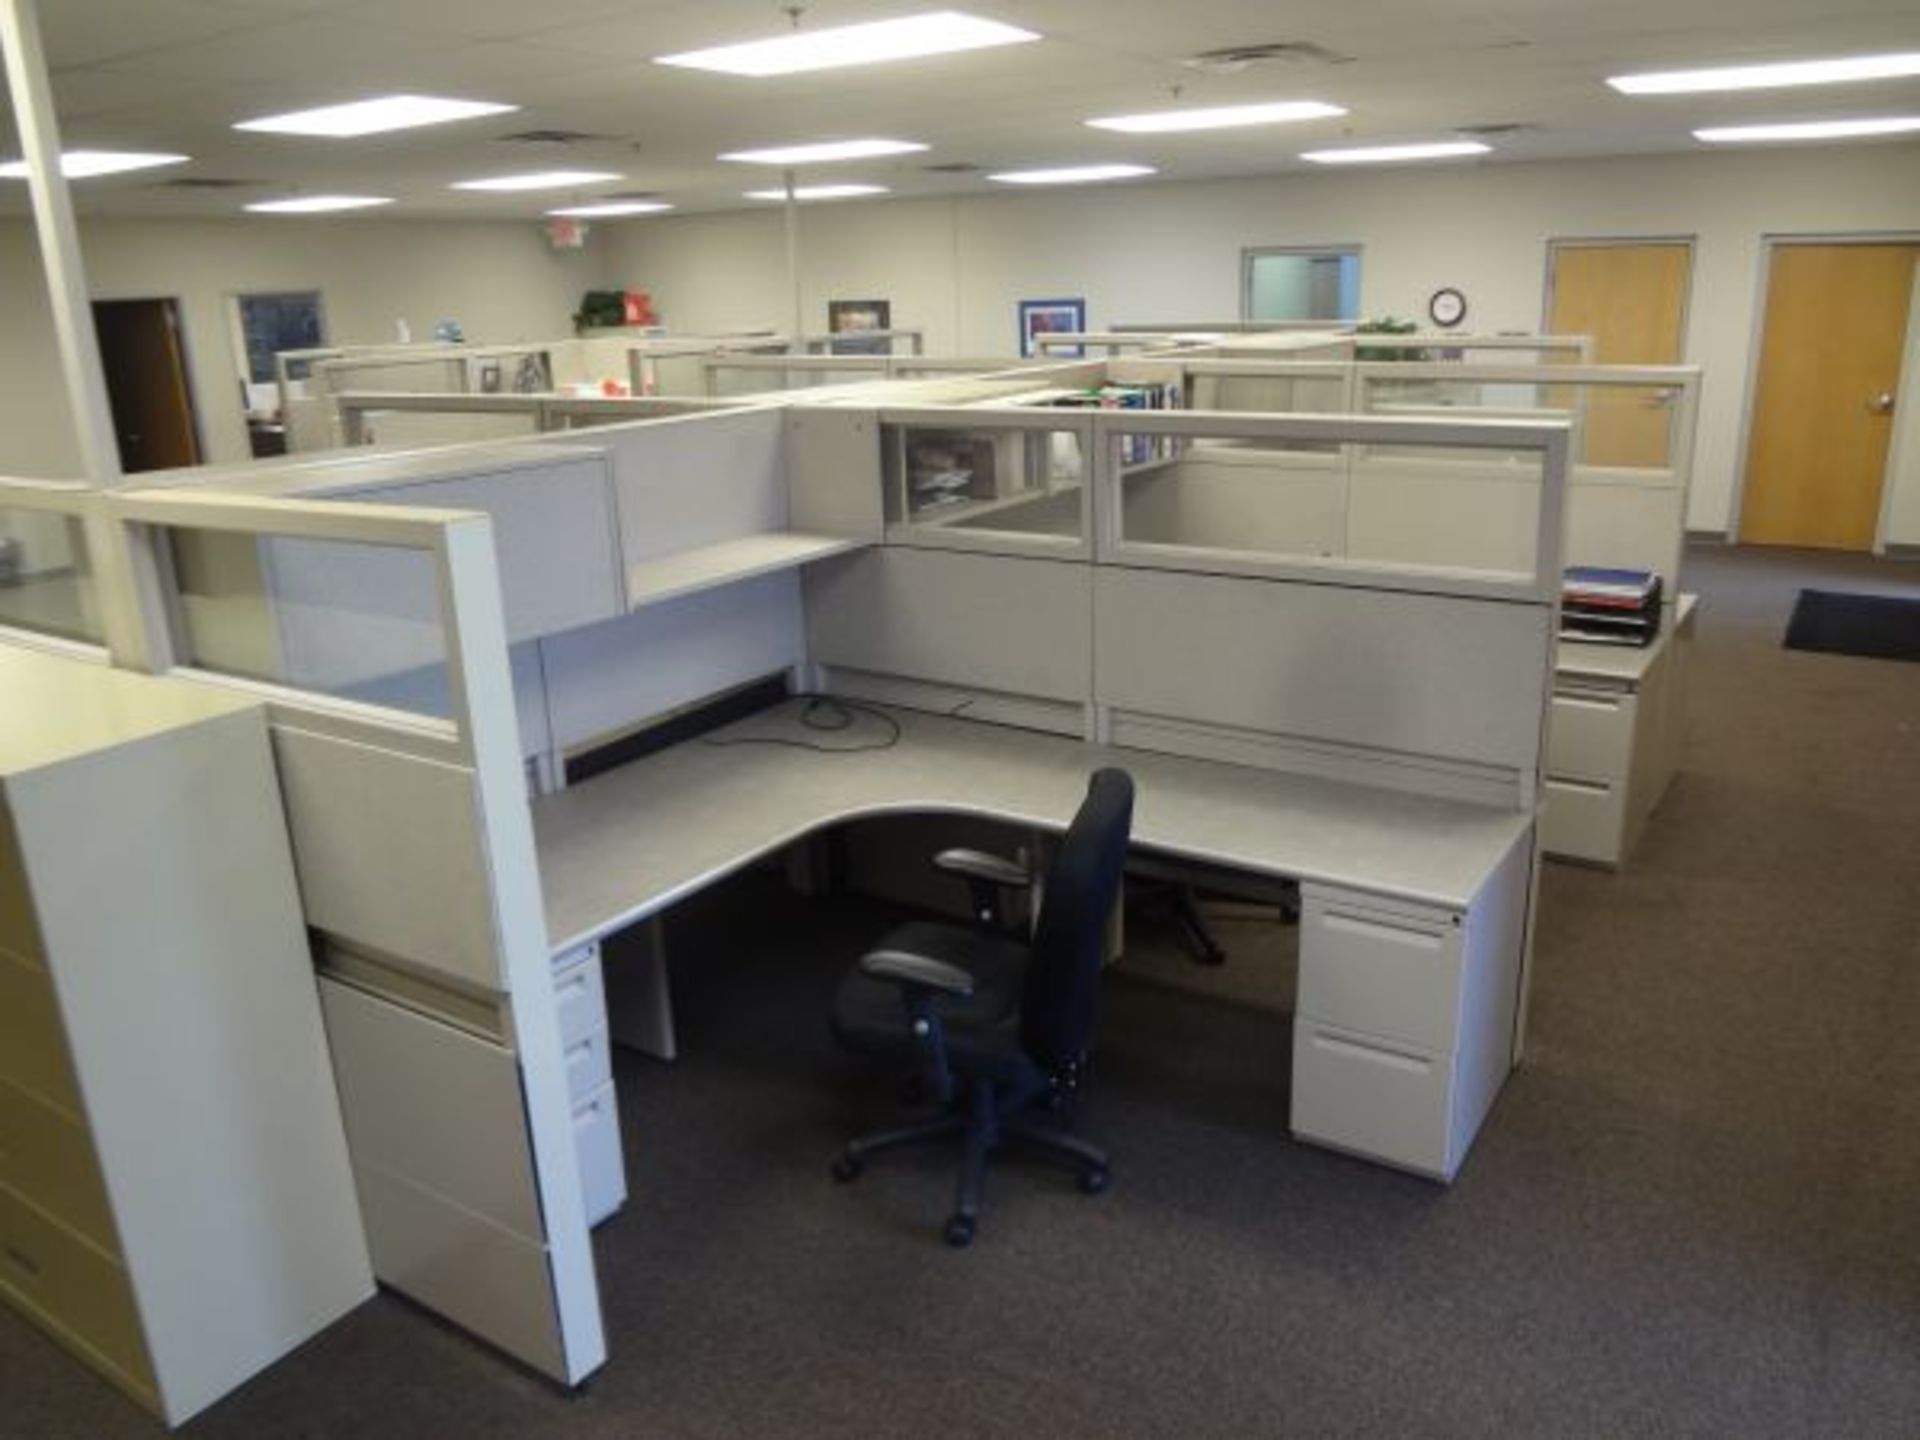 (LOT) 88" X 86" X 65" SIX-PERSON MARVELL MODULAR OFFICE INCLUDING (1) OVERHEAD CABINET, (1) OVERHEAD - Image 5 of 6